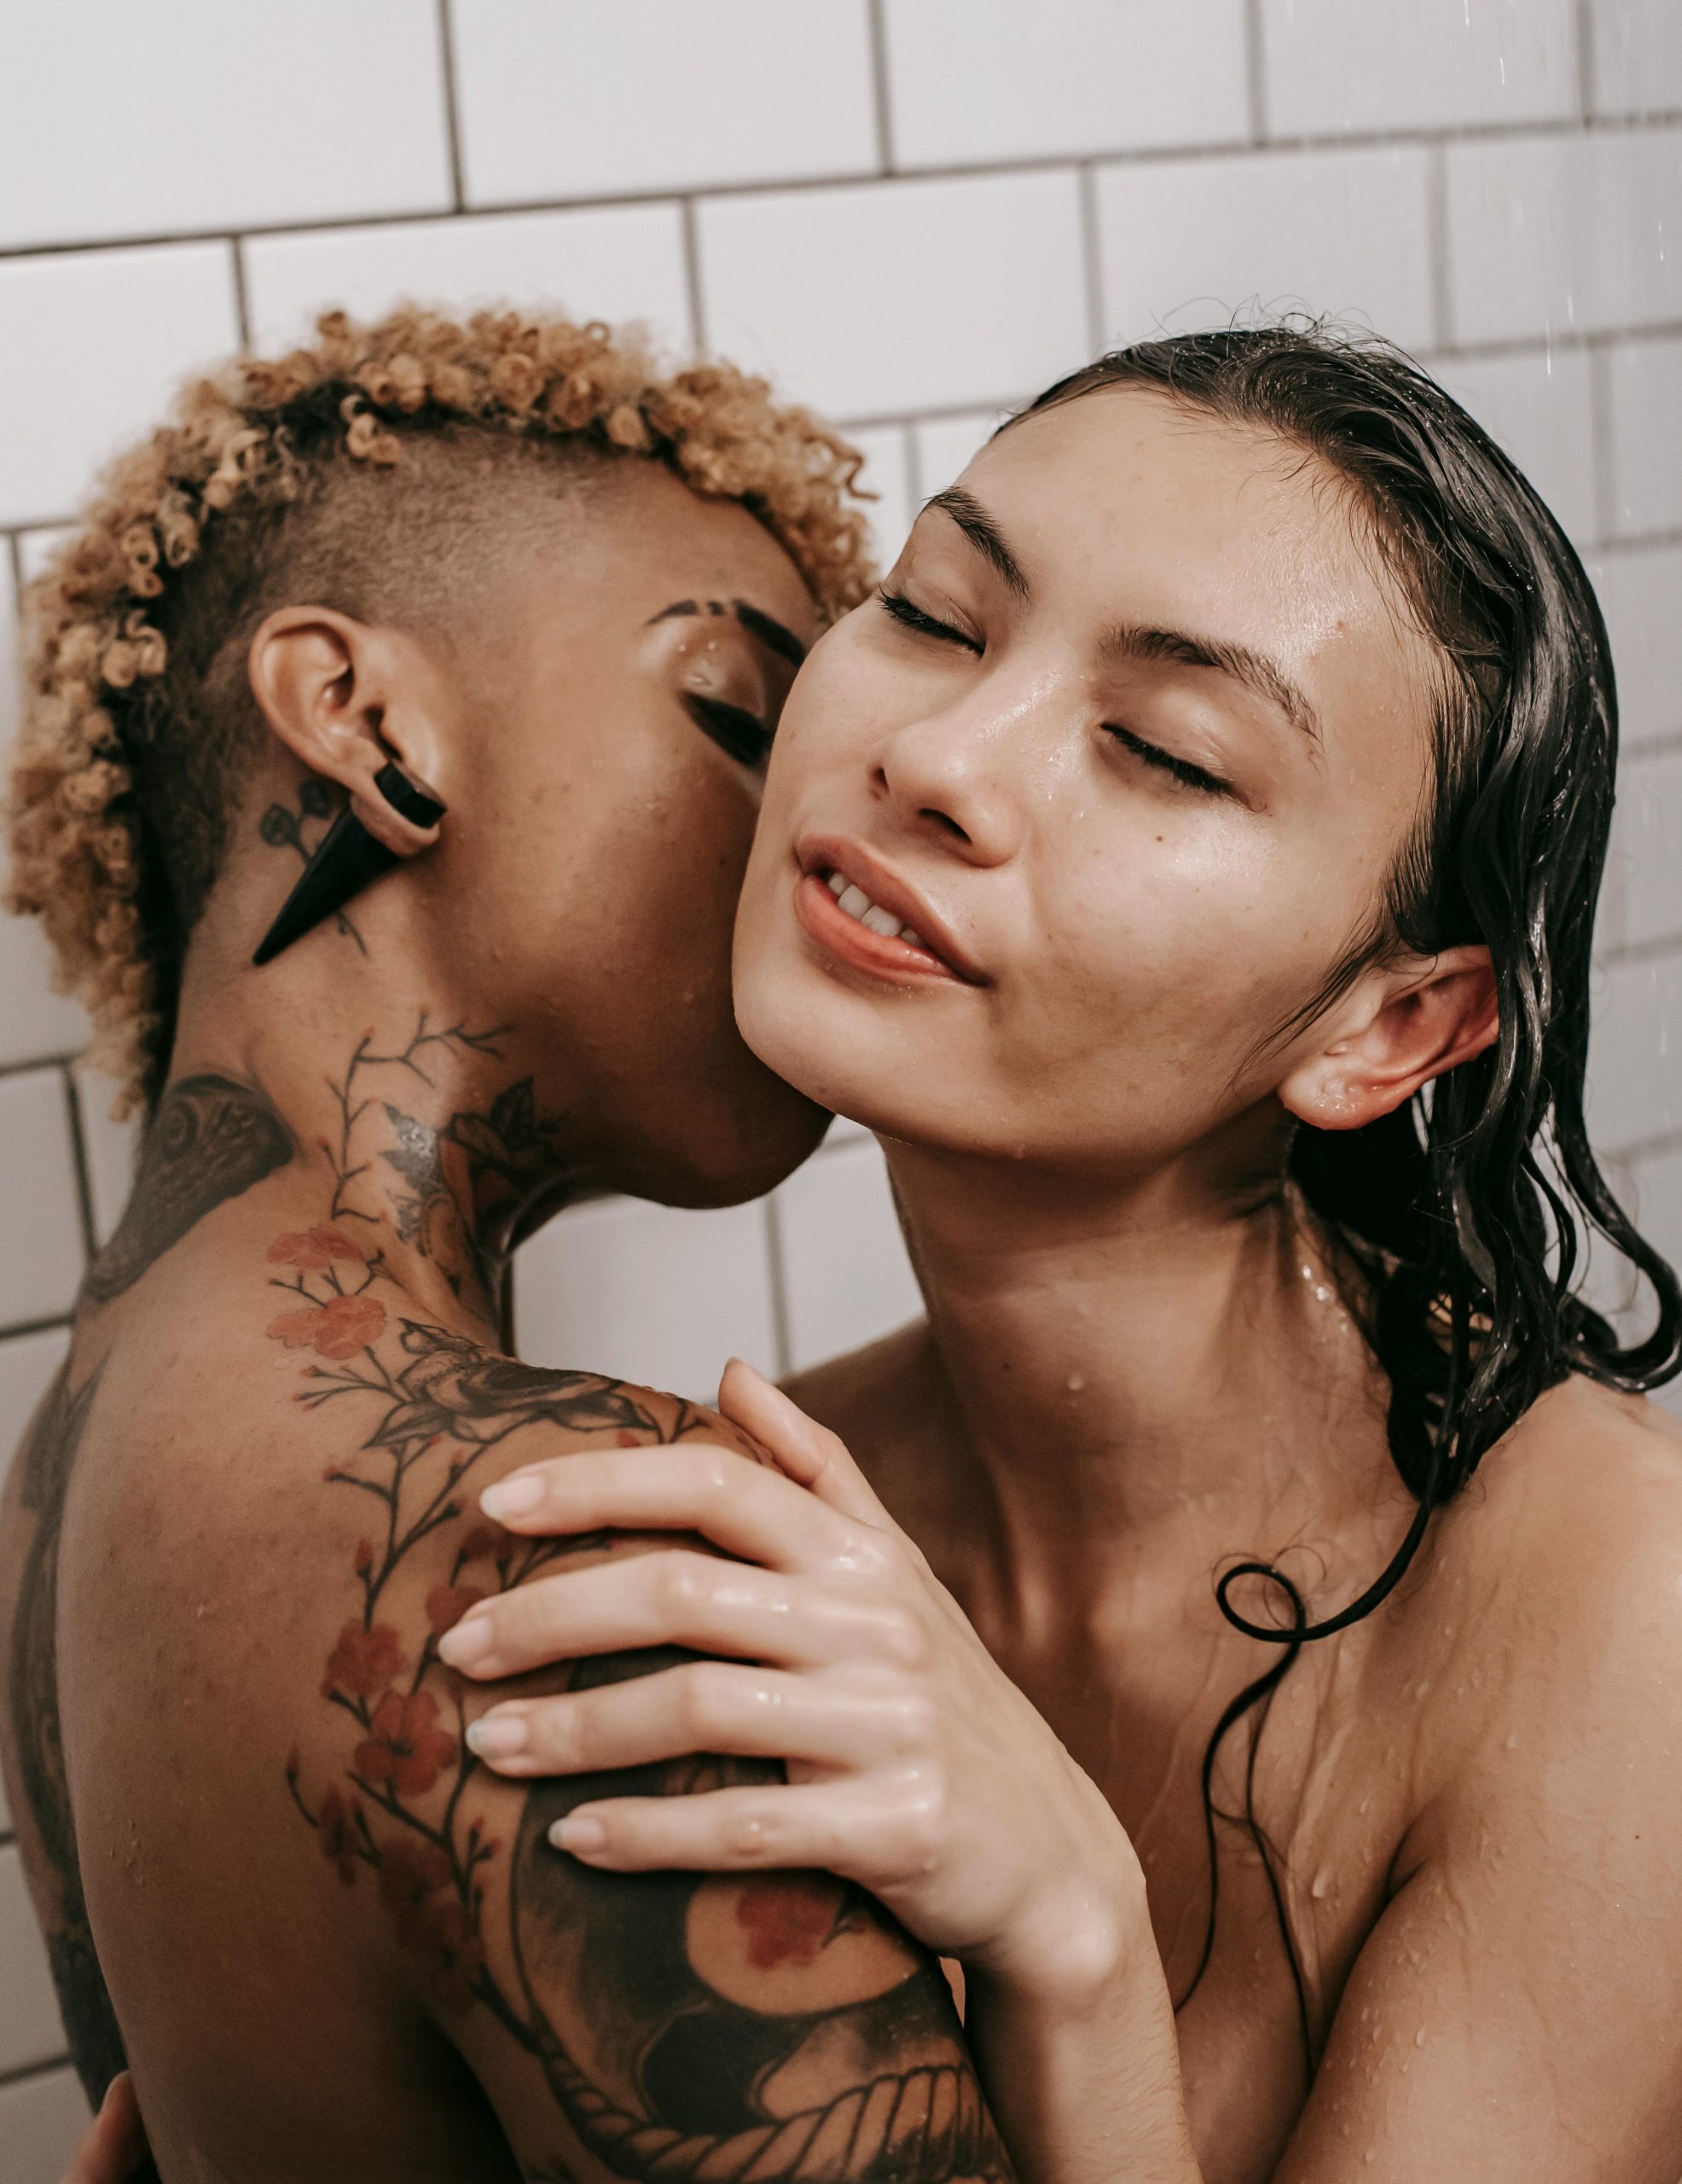 people being intimate in shower